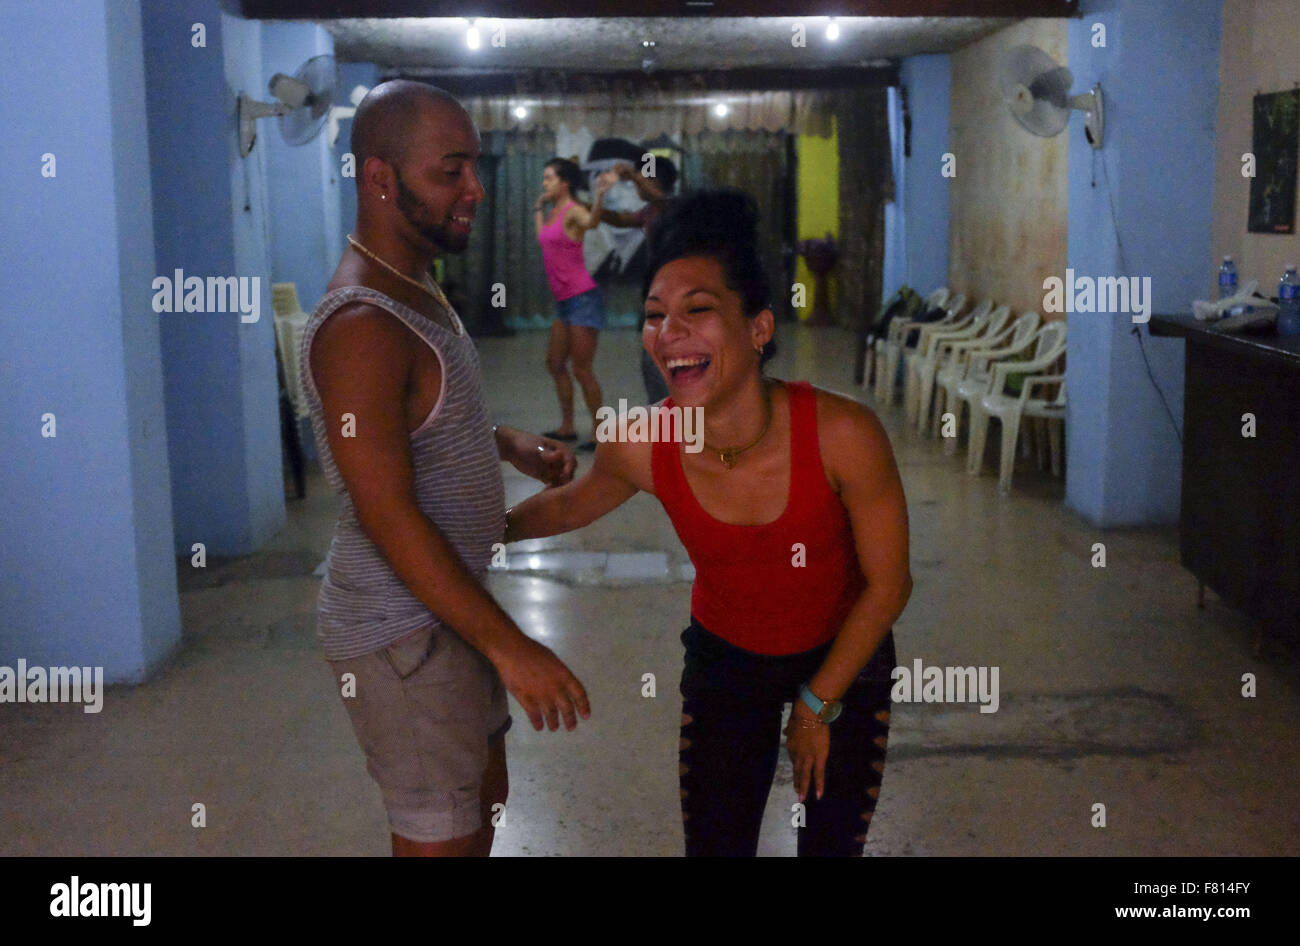 Havana, Cuba. 28th Oct, 2015. Dance instructors share a laughin Havana Cuba, Oct 28 2015. Cuban authorities are negotiating with the US on normalization talks to open Cuba to the United States. Photo Andre Forget © Andre Forget/ZUMA Wire/Alamy Live News Stock Photo